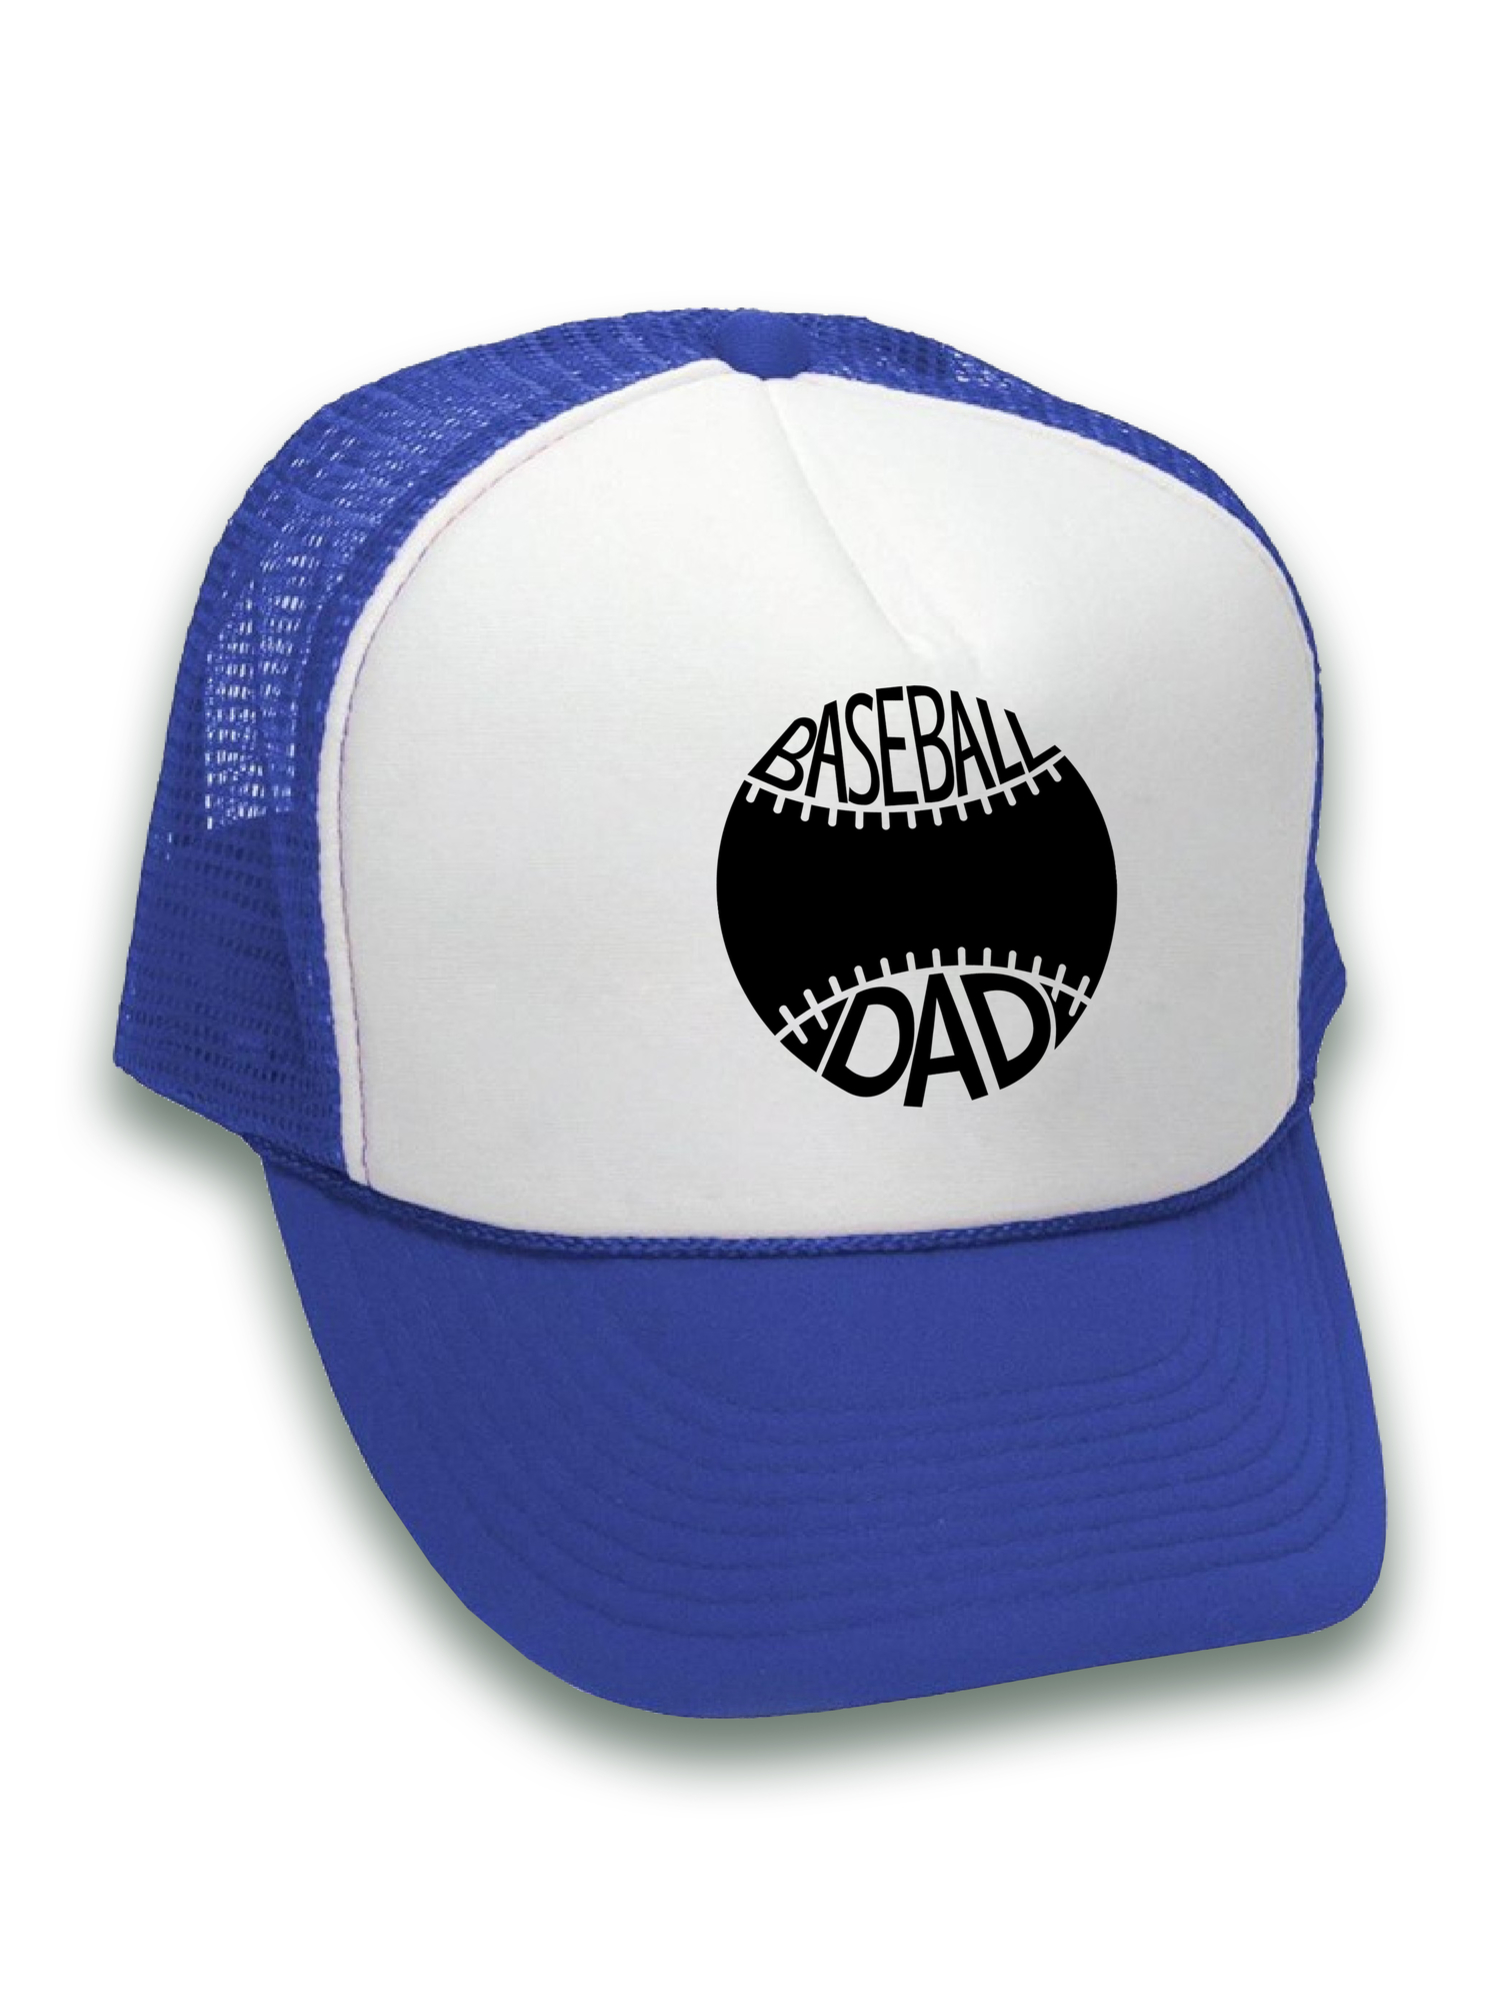 Awkward Styles Baseball Dad Trucker Hat Baseball Hat for Dad Baseball Gifts Father's Day Trucker Hats Sports Dad Snapback Hat Baseball Fans Cheer Dad Trucker Hat Cool Sports Gifts for Dad Father Hat - image 2 of 6